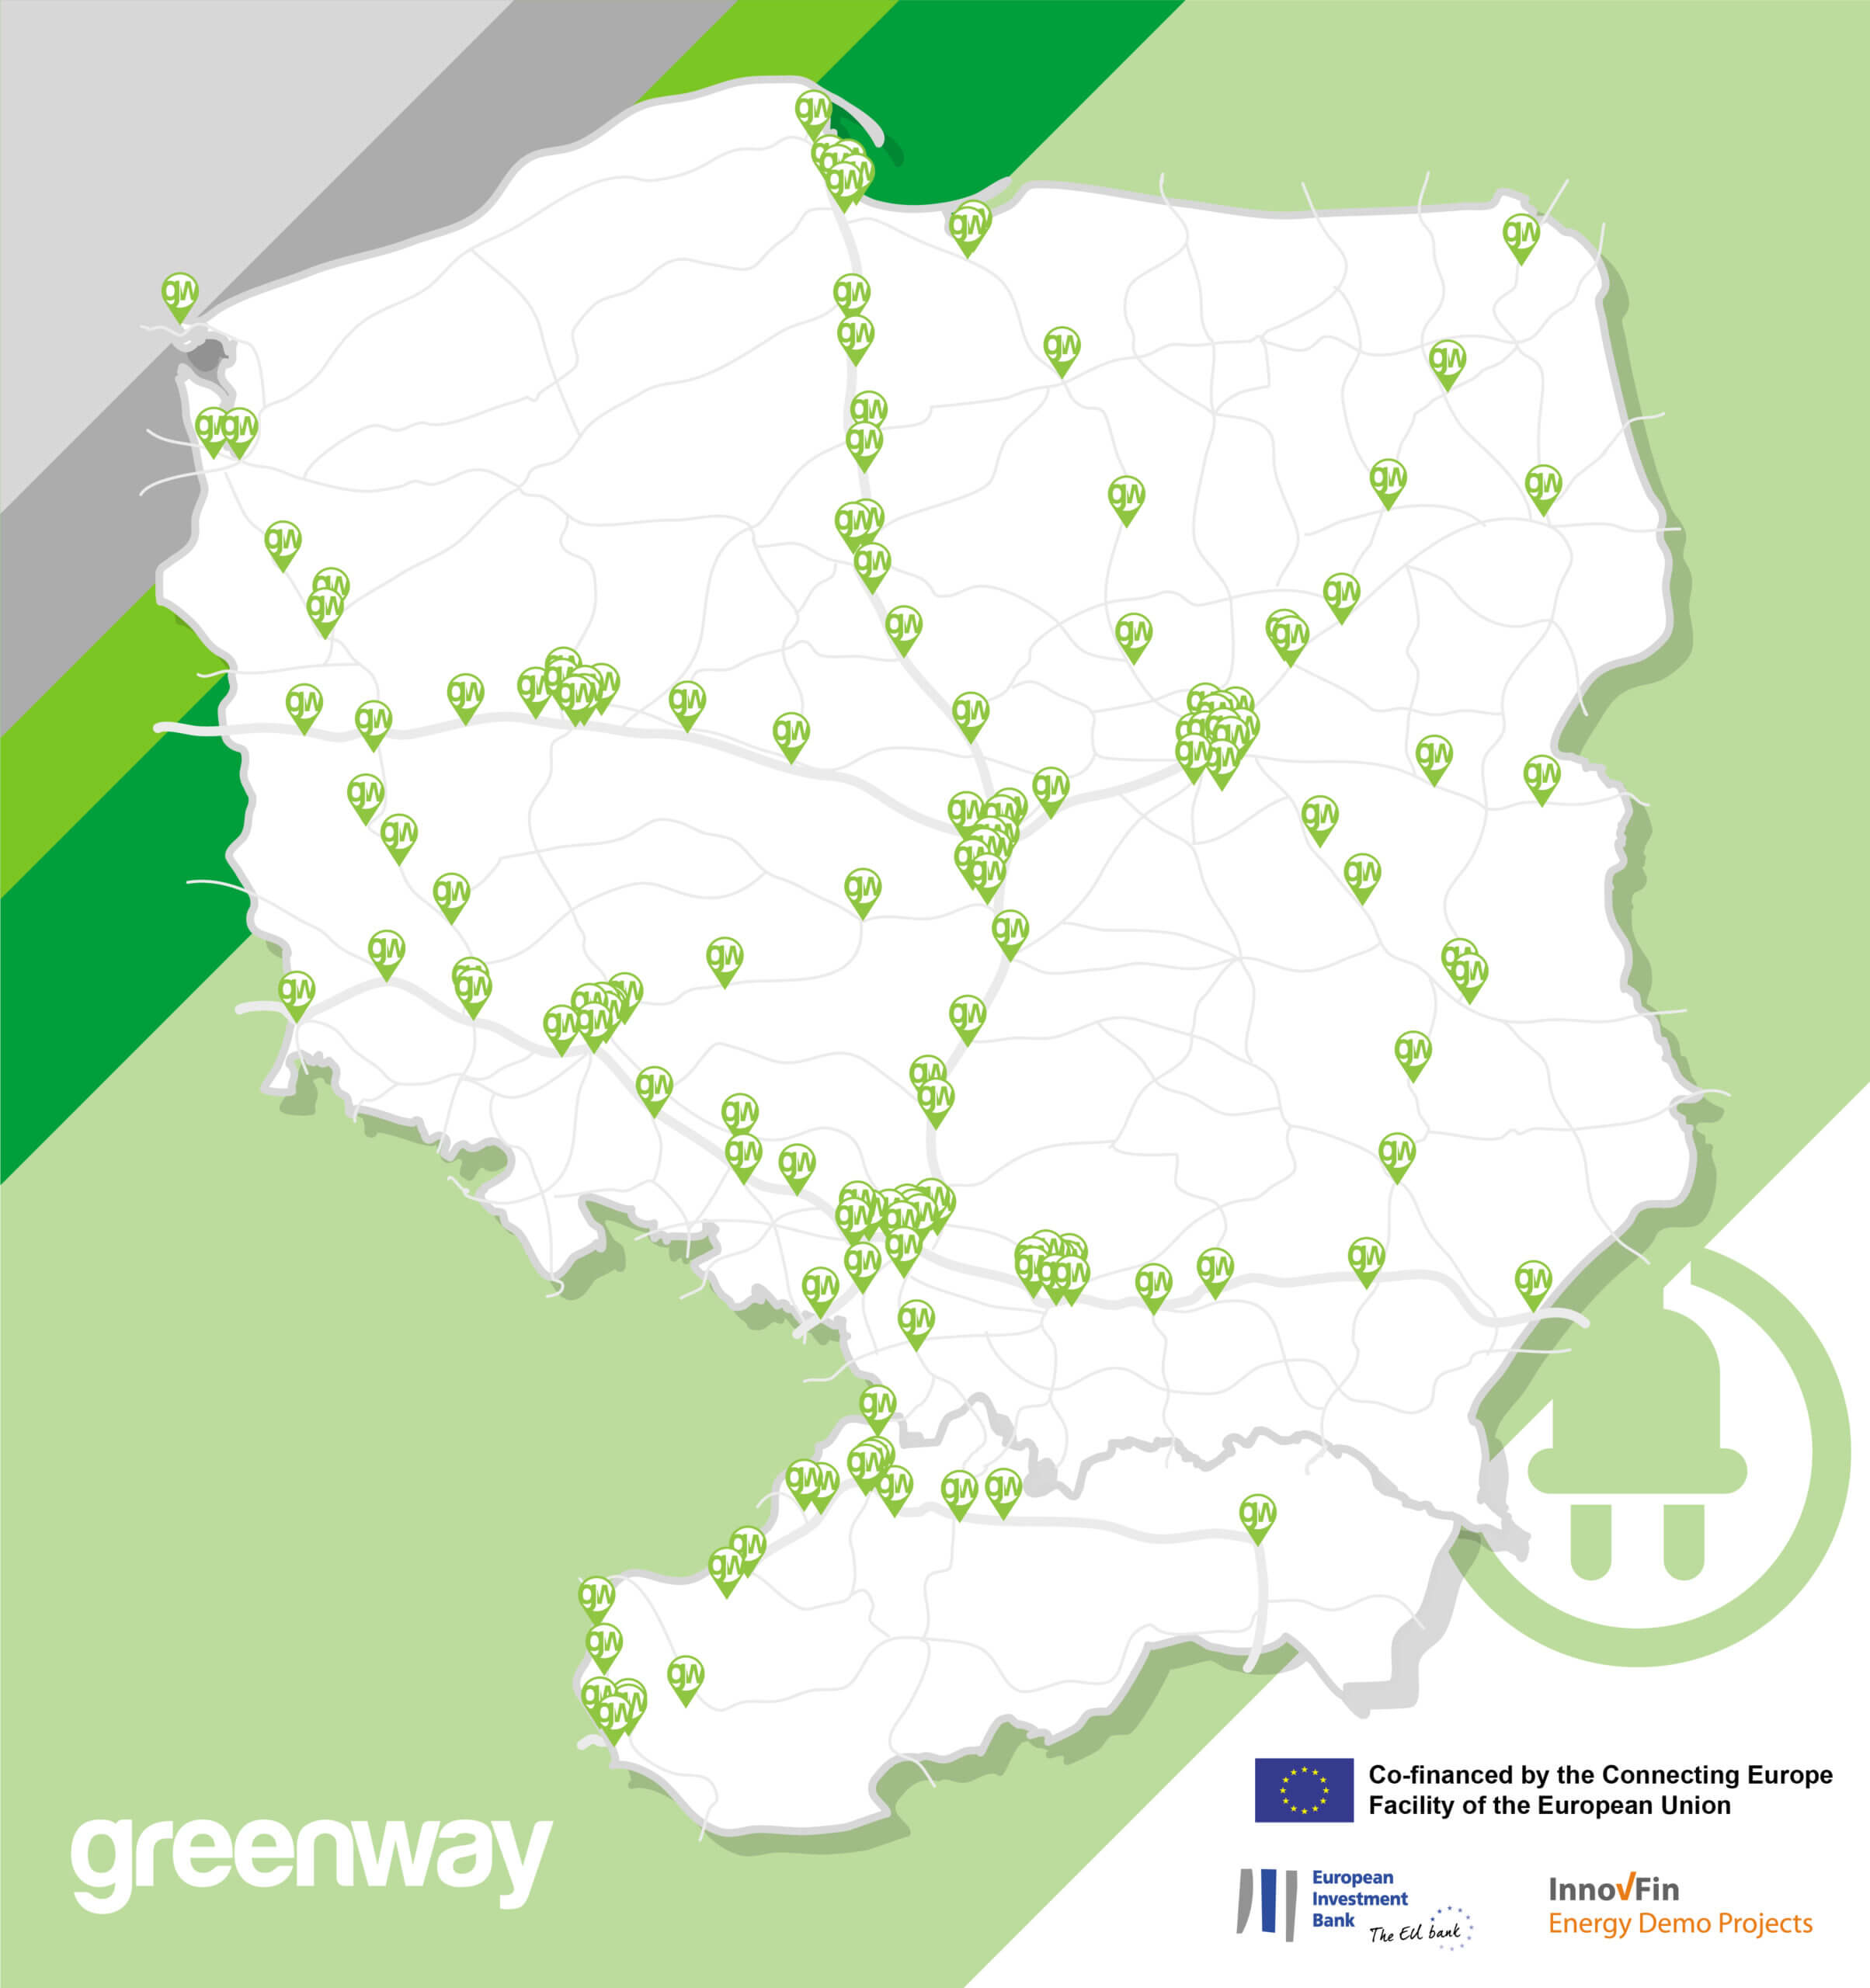 A pioneering project by GreenWay